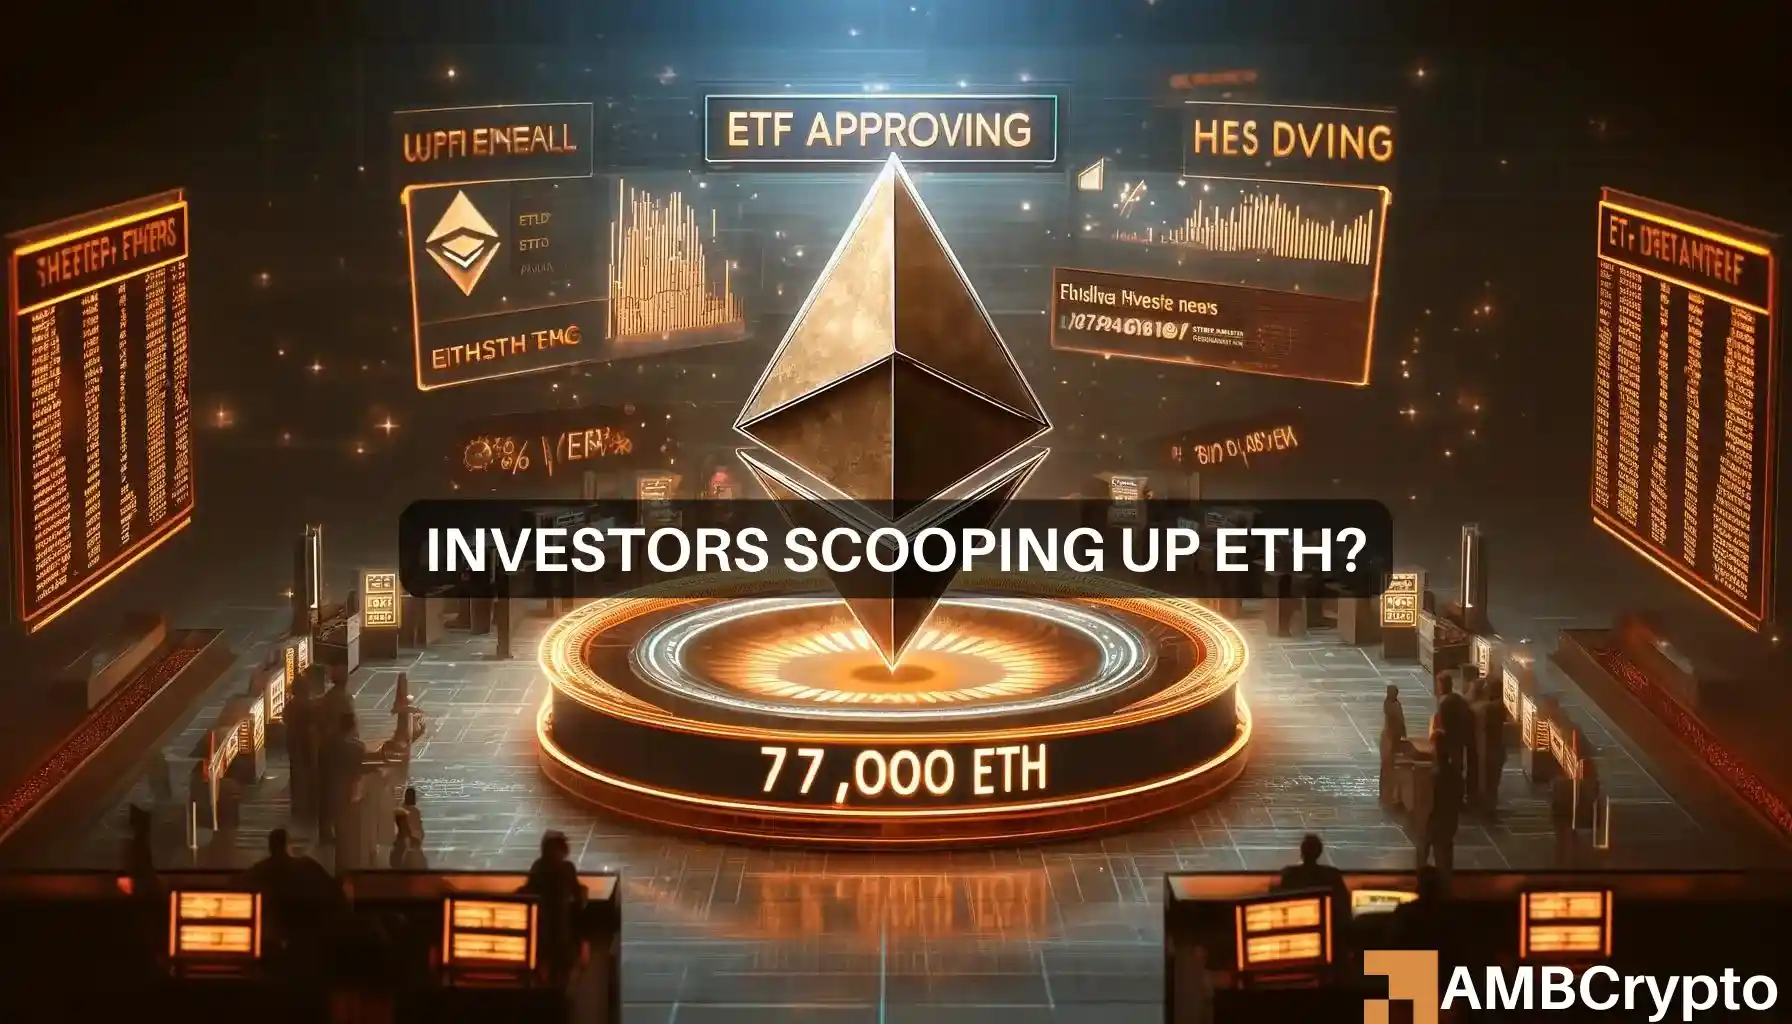 777,000 Ethereum moved post-ETF approval: Impact on ETH?